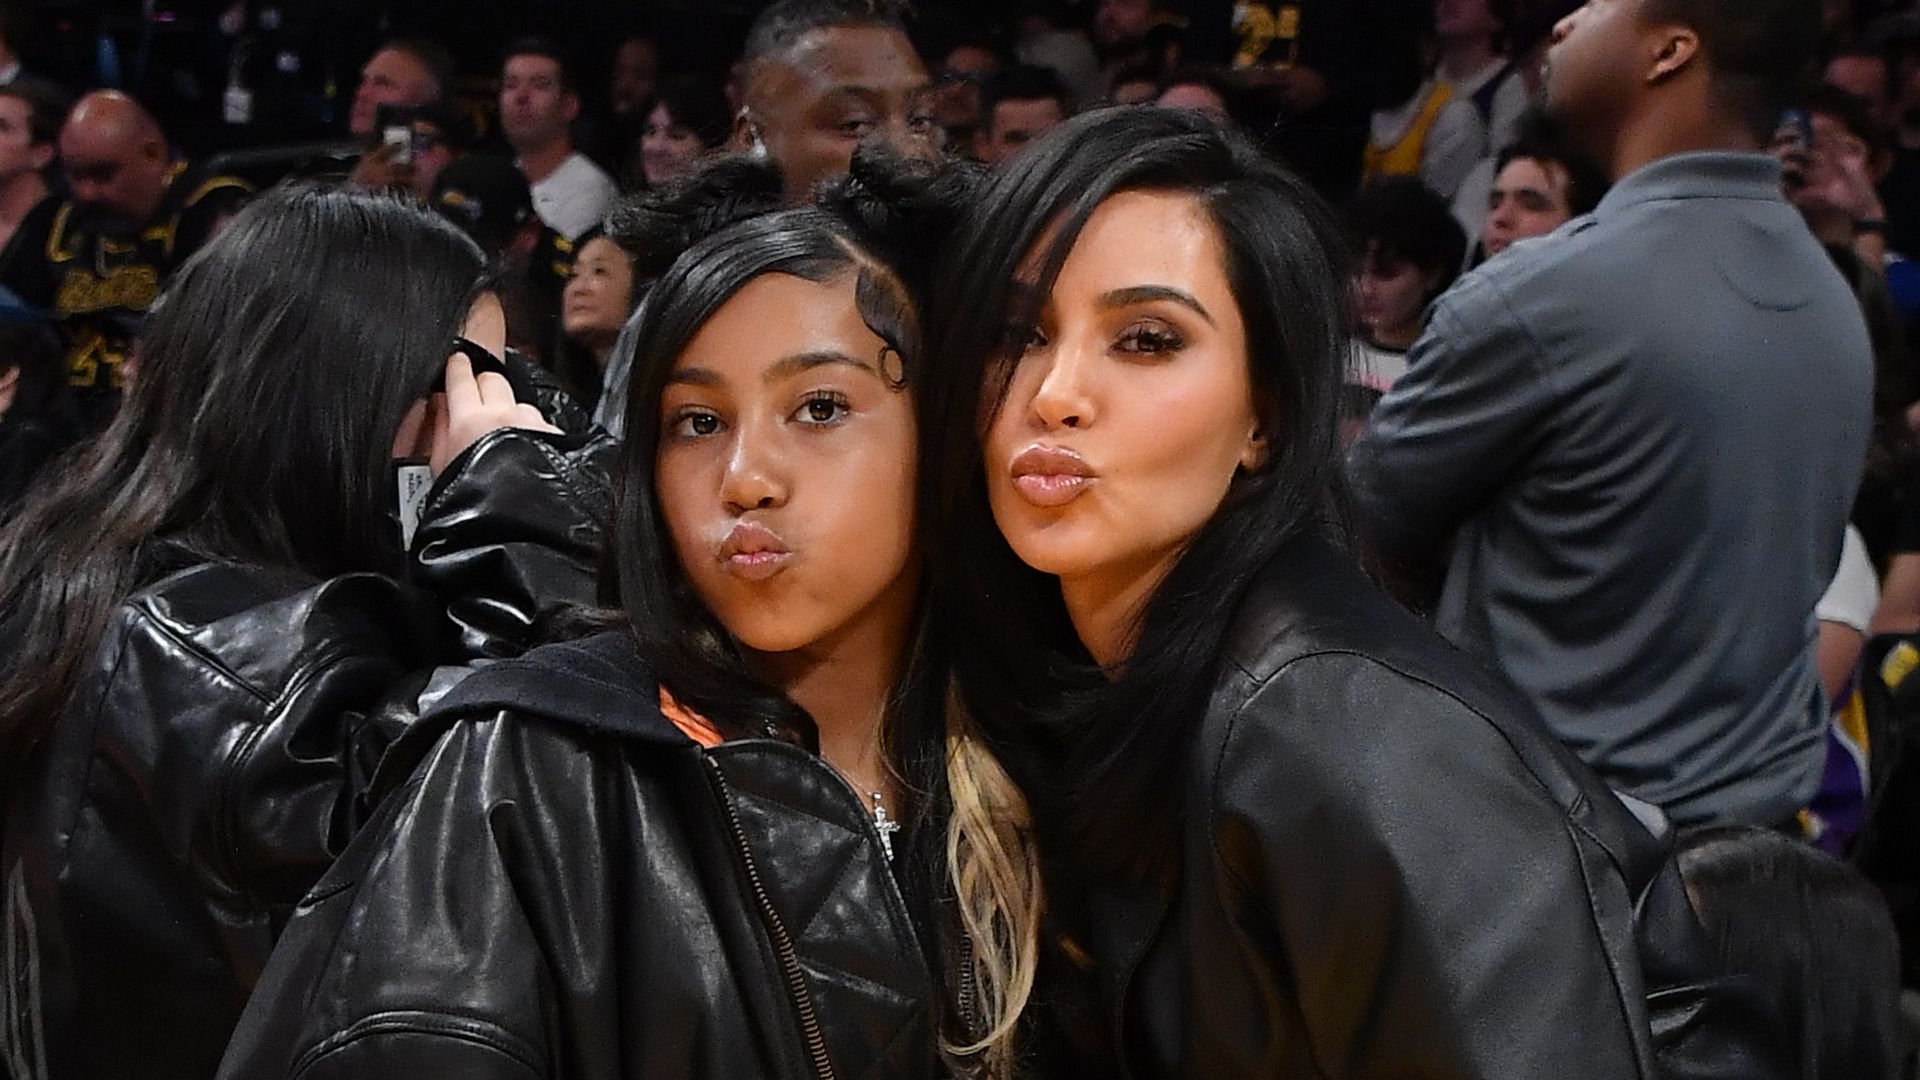 North West, 10, divides fans after Kim Kardashian shares photo of daughter dripping in diamonds